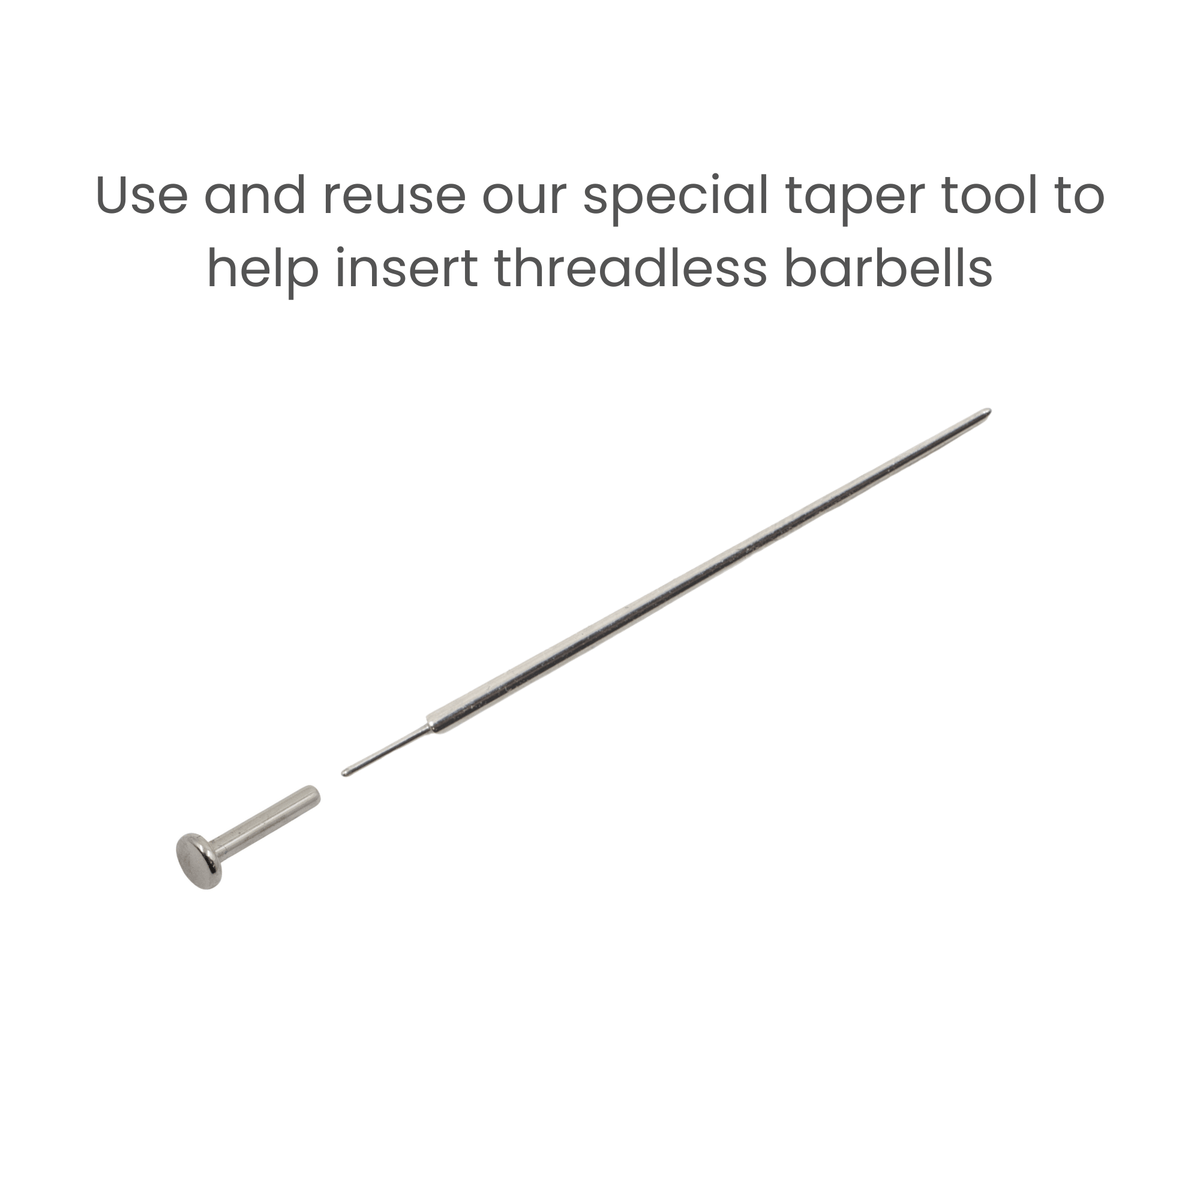 1mm (18 gauge) Piercing Tools Barbell Insertion Taper The Curated Lobecartilagedaithearring taper